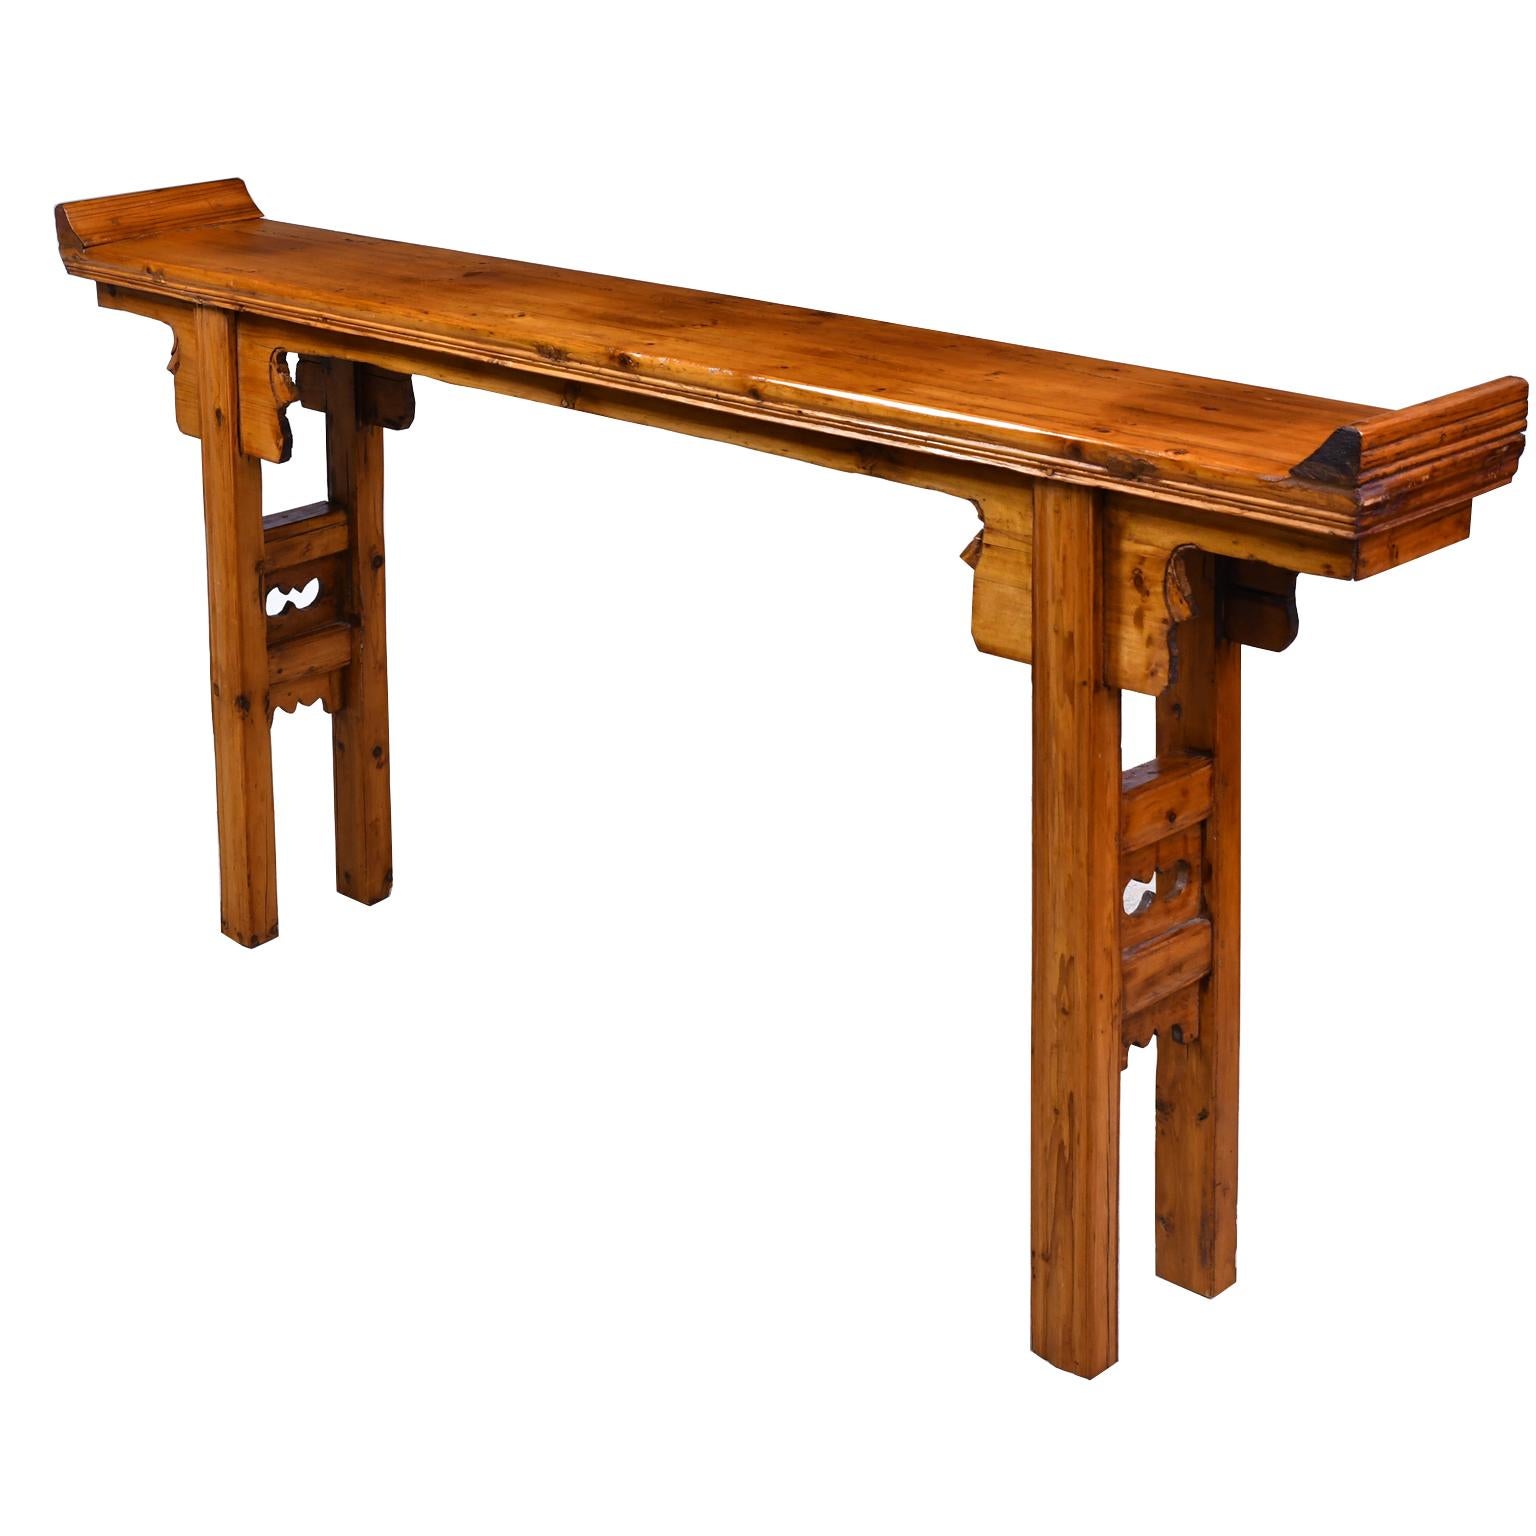 A Qing Chinese Altar table in elm and pine with everted ends on the top, square legs with carved stretchers and carved flanges. Shanxi, China, 20th century
Measures: 66